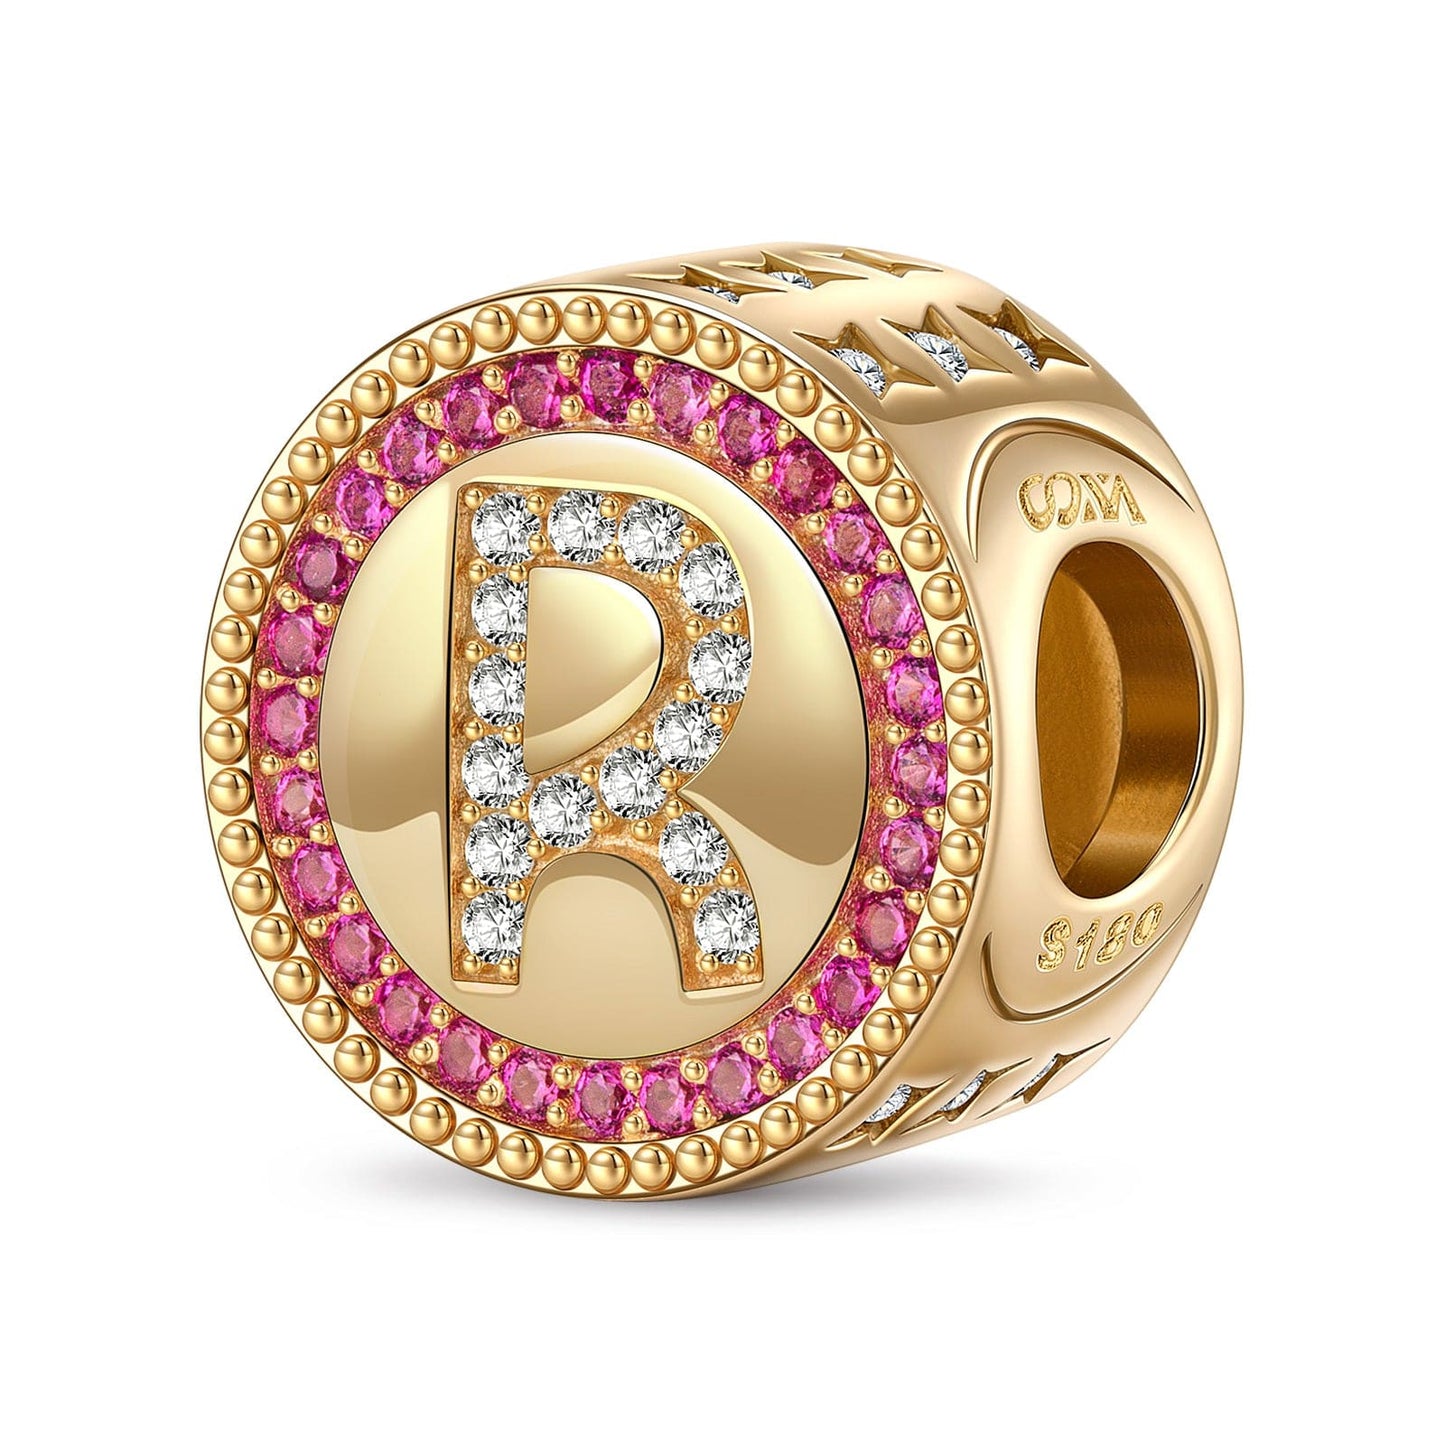 Paris: A New Age - Letter R Tarnish-resistant Silver Charms In 14K Gold Plated